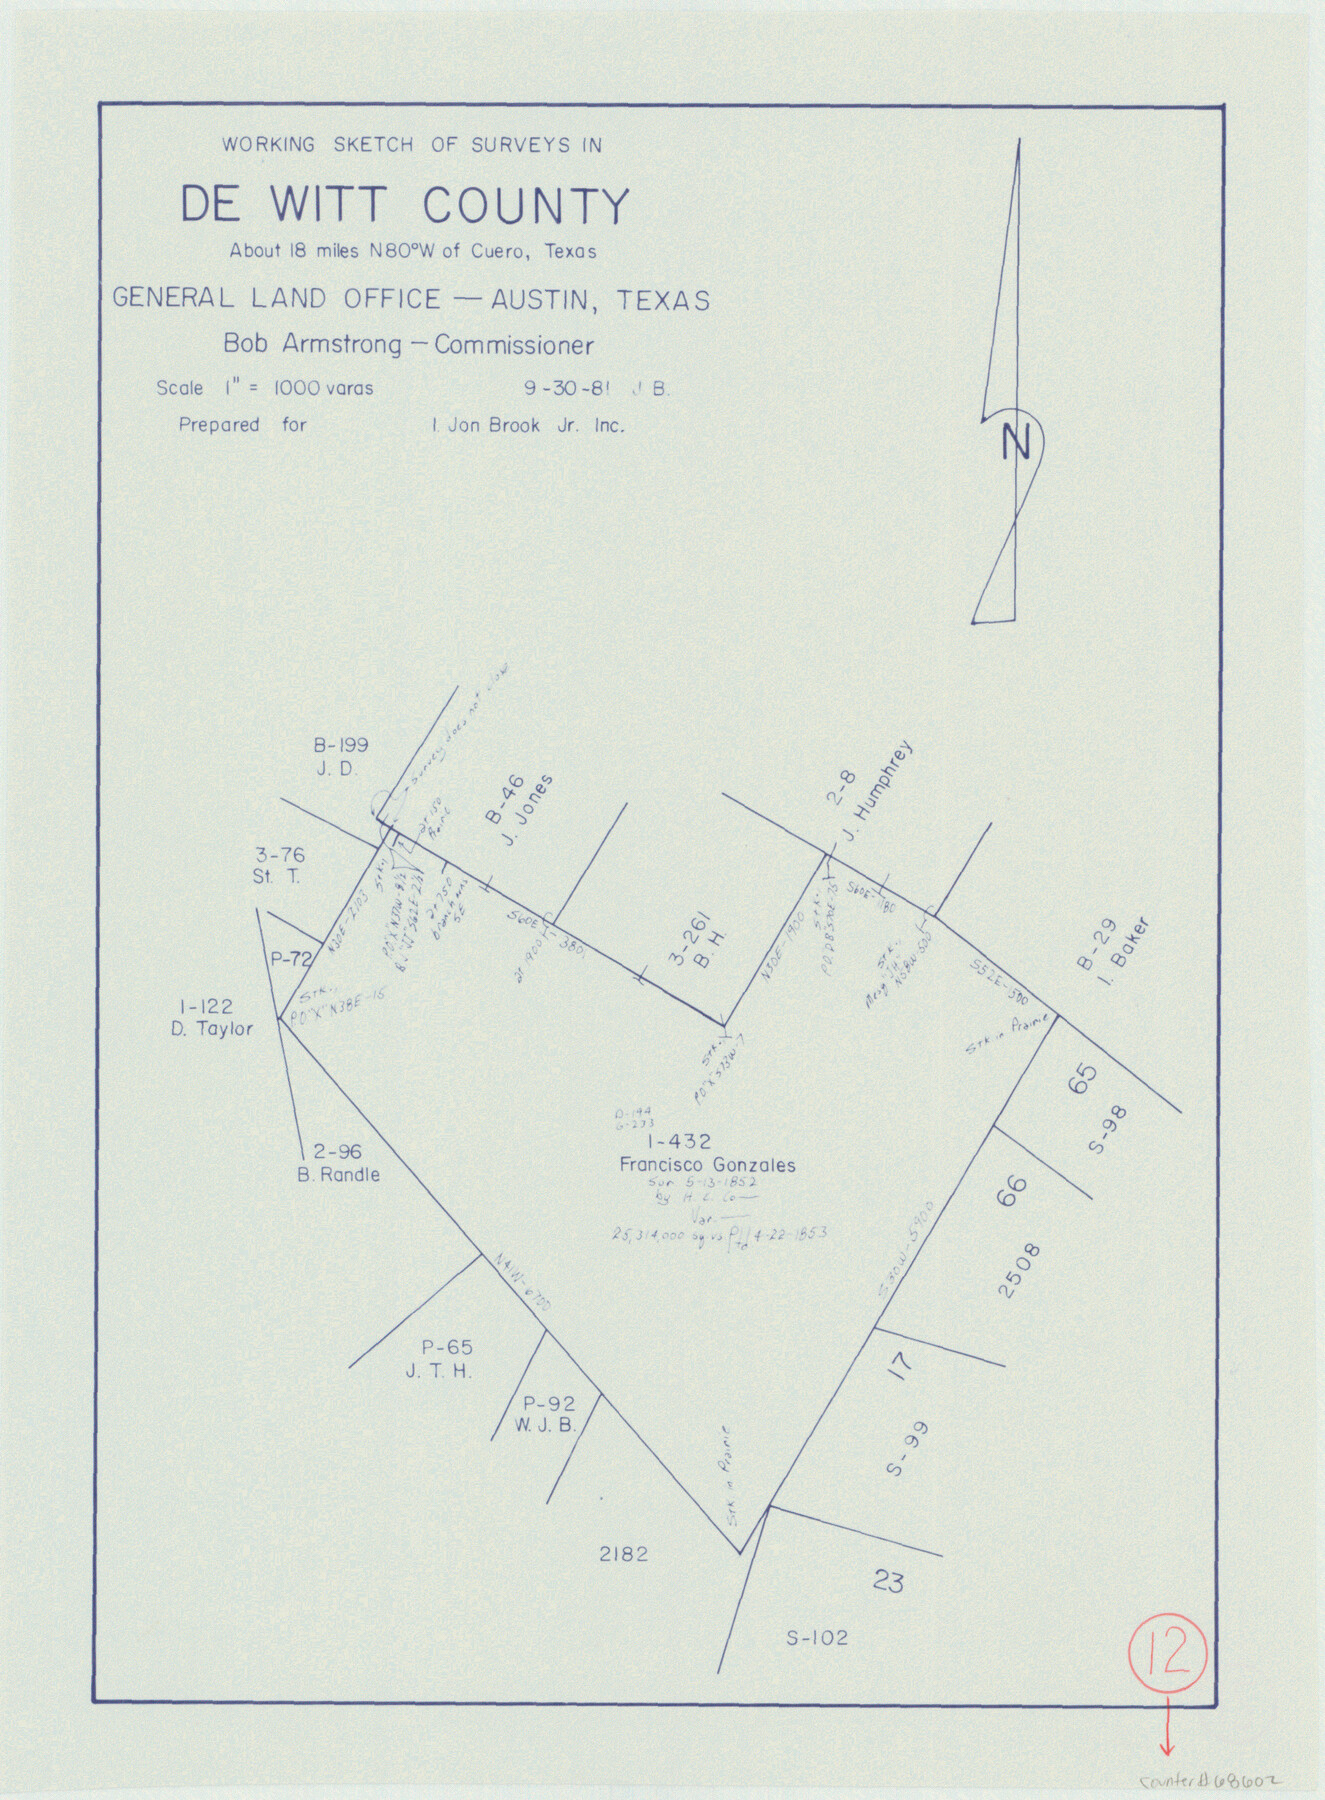 68602, DeWitt County Working Sketch 12, General Map Collection